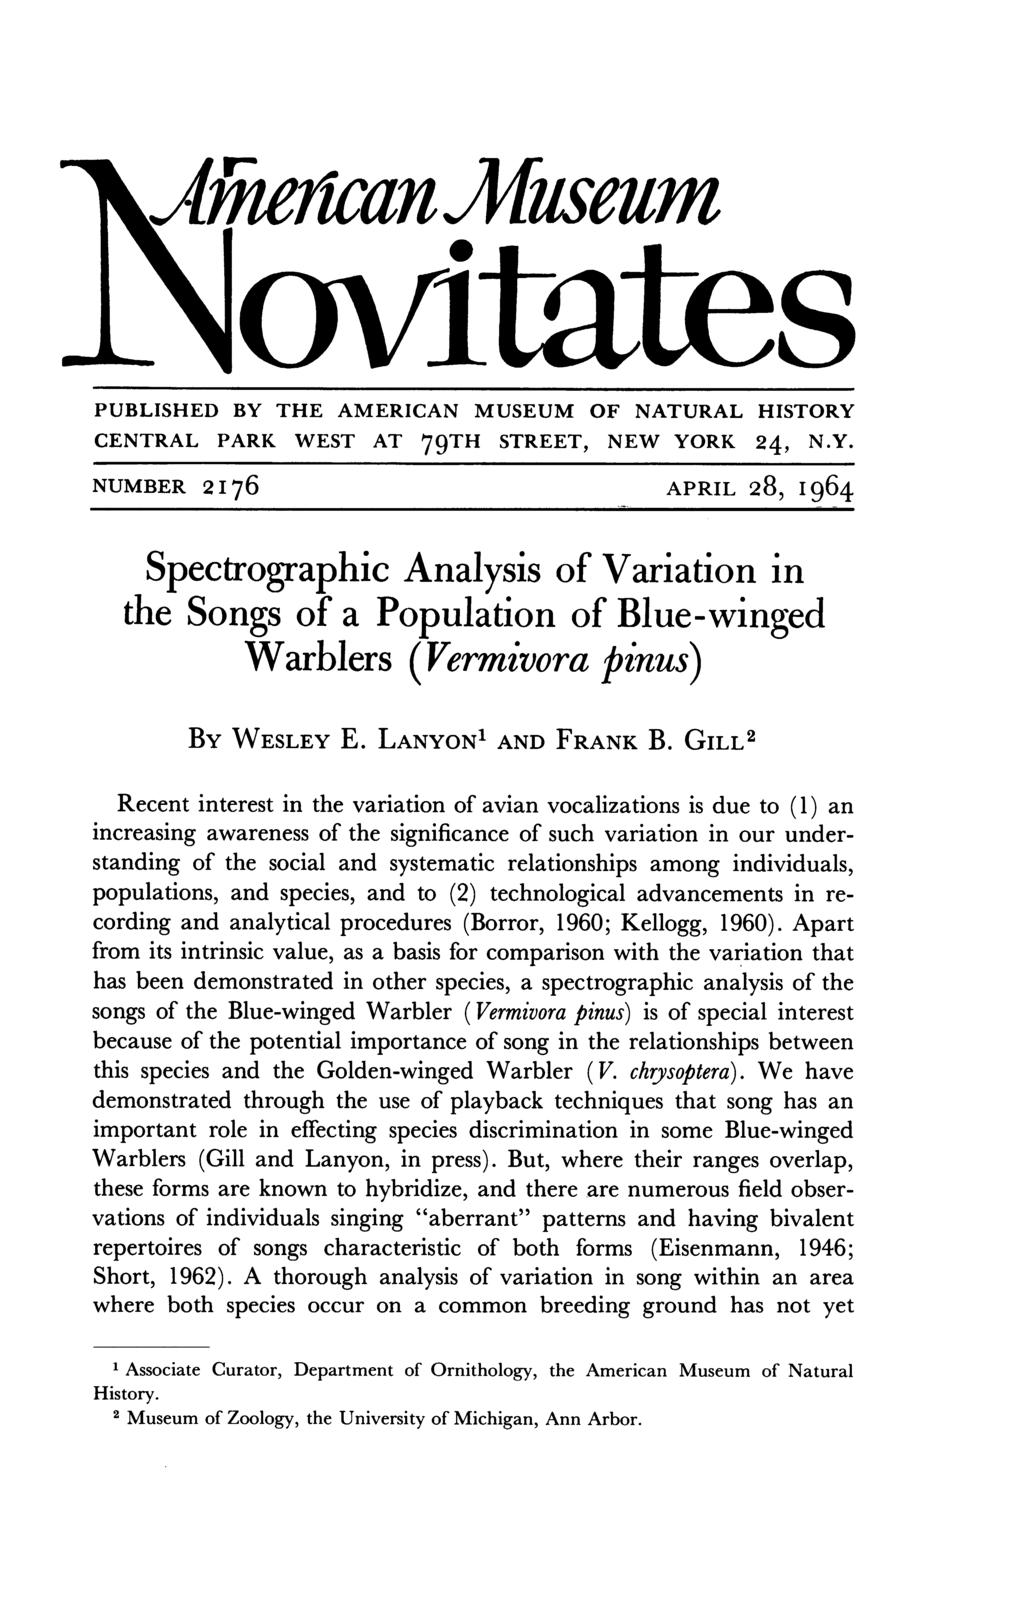 } ihzeucan Juseum PUBLISHED BY THE AMERICAN MUSEUM OF NATURAL HISTORY CENTRAL PARK WEST AT 79TH STREET, NEW YORK 24, N.Y. NUMBER 2I76 APRIL 28, I 964 Spectrographic Analysis of Variation in the Songs of a Population of Blue-winged Warblers (Vermivora pinus) BY WESLEY E.